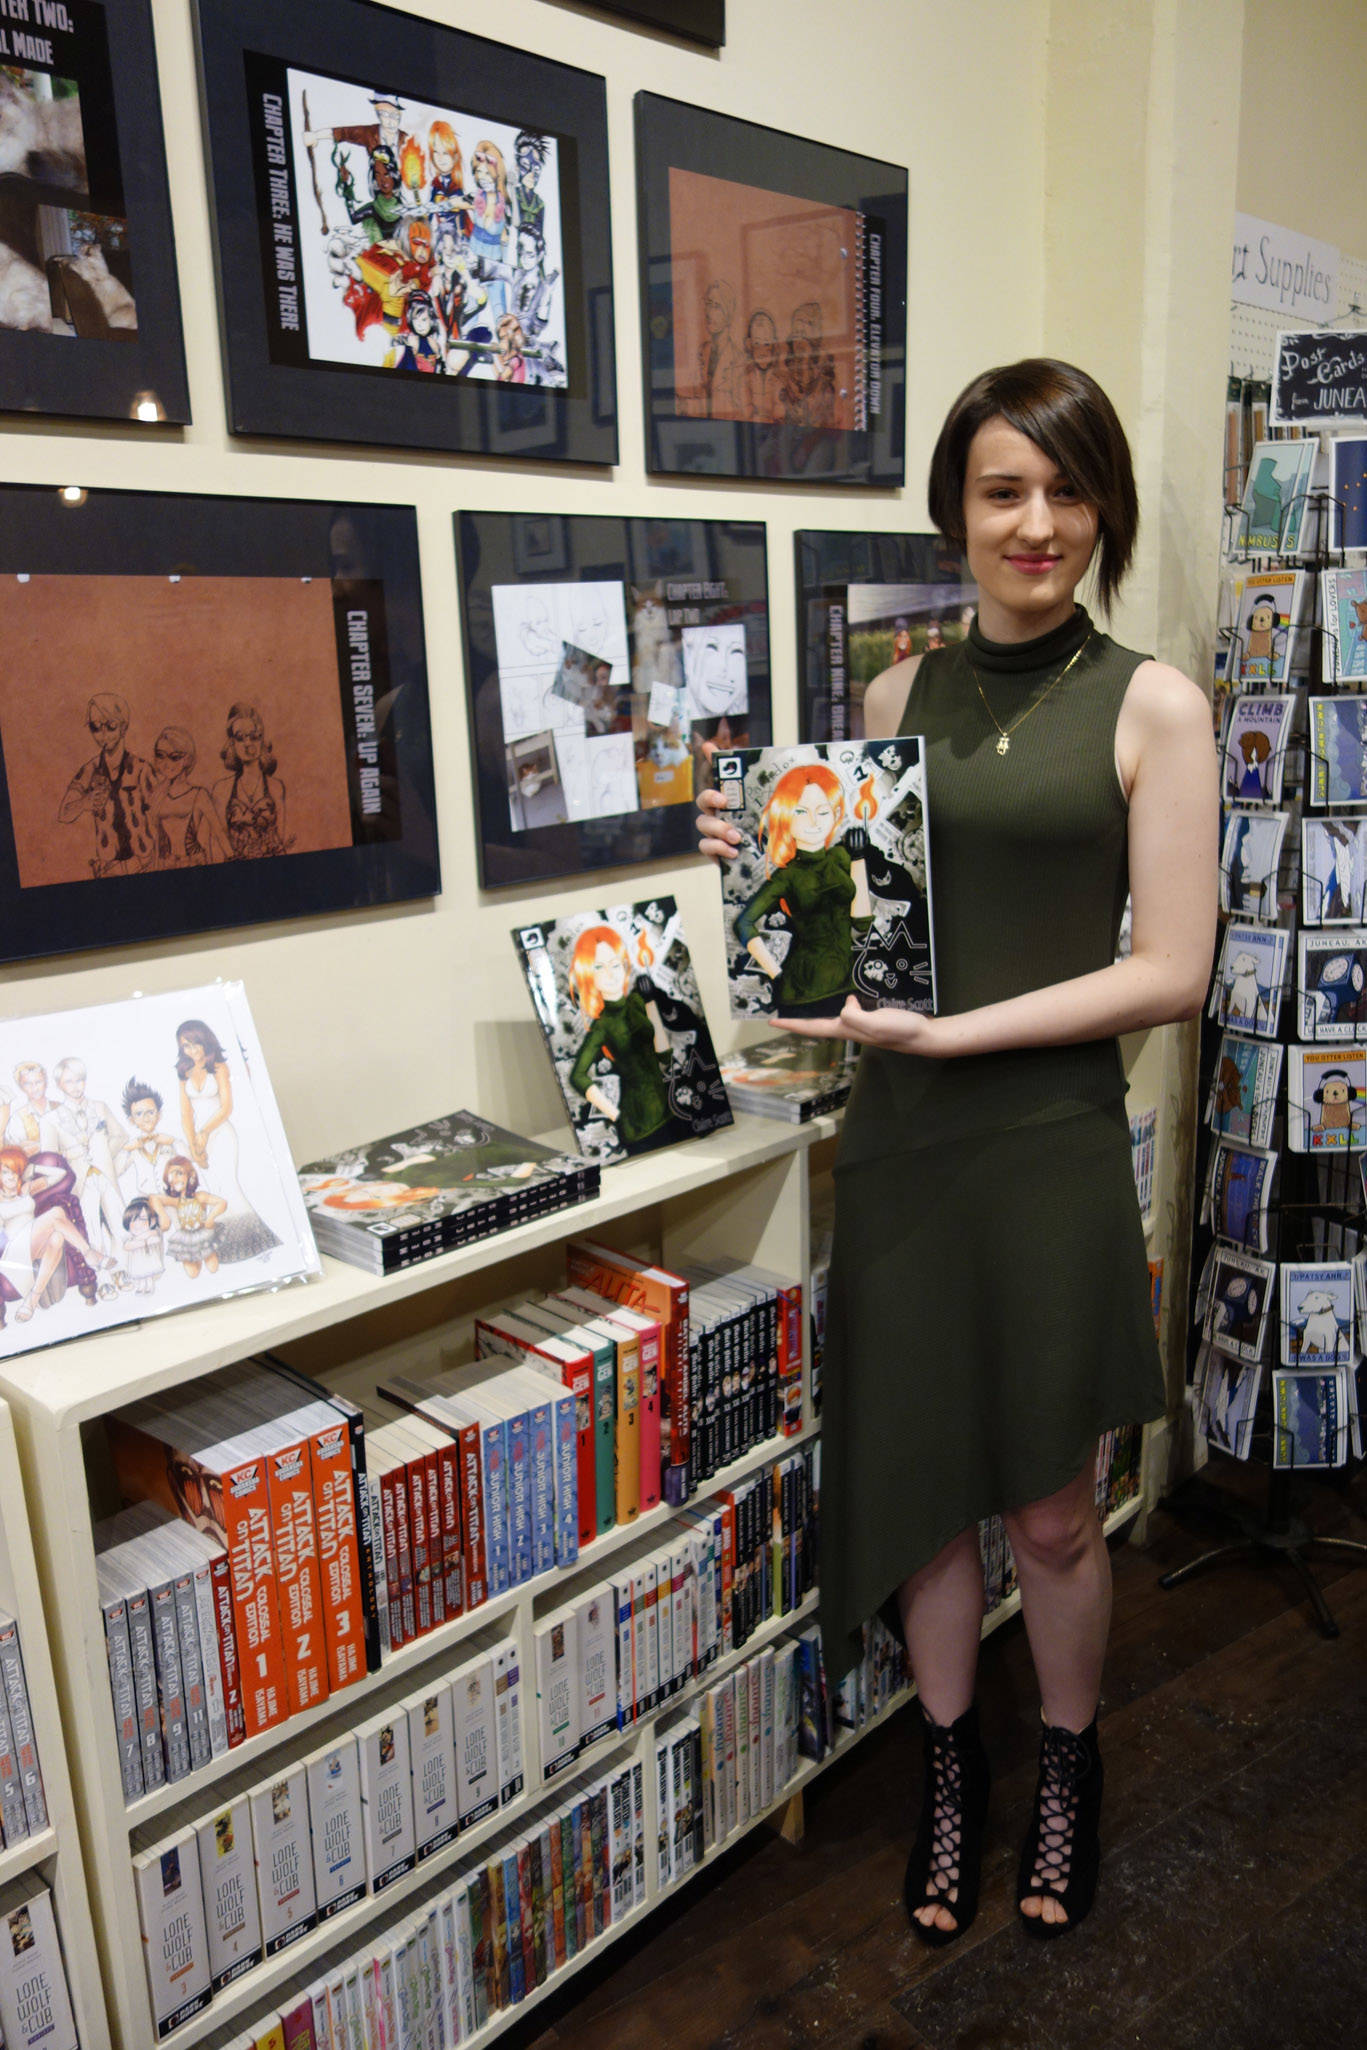 Claire Scott poses with a copy of her graphic novel “Meow Cats United” in front of her art on display in the Alaska Robotics Gallery on First Friday. Clara Miller | Capital City Weekly